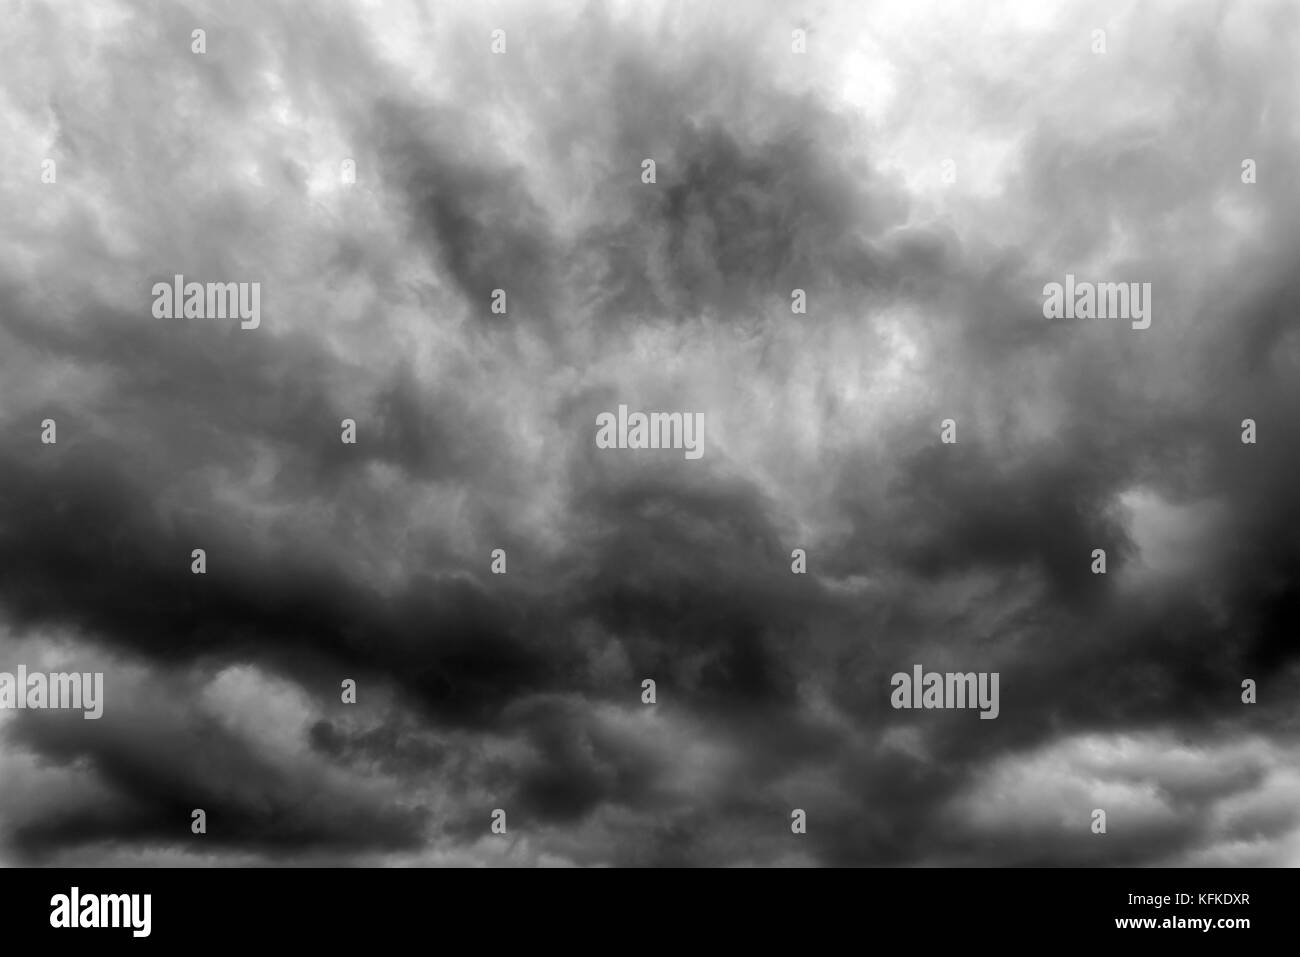 Heavy rain clouds in black and white Stock Photo